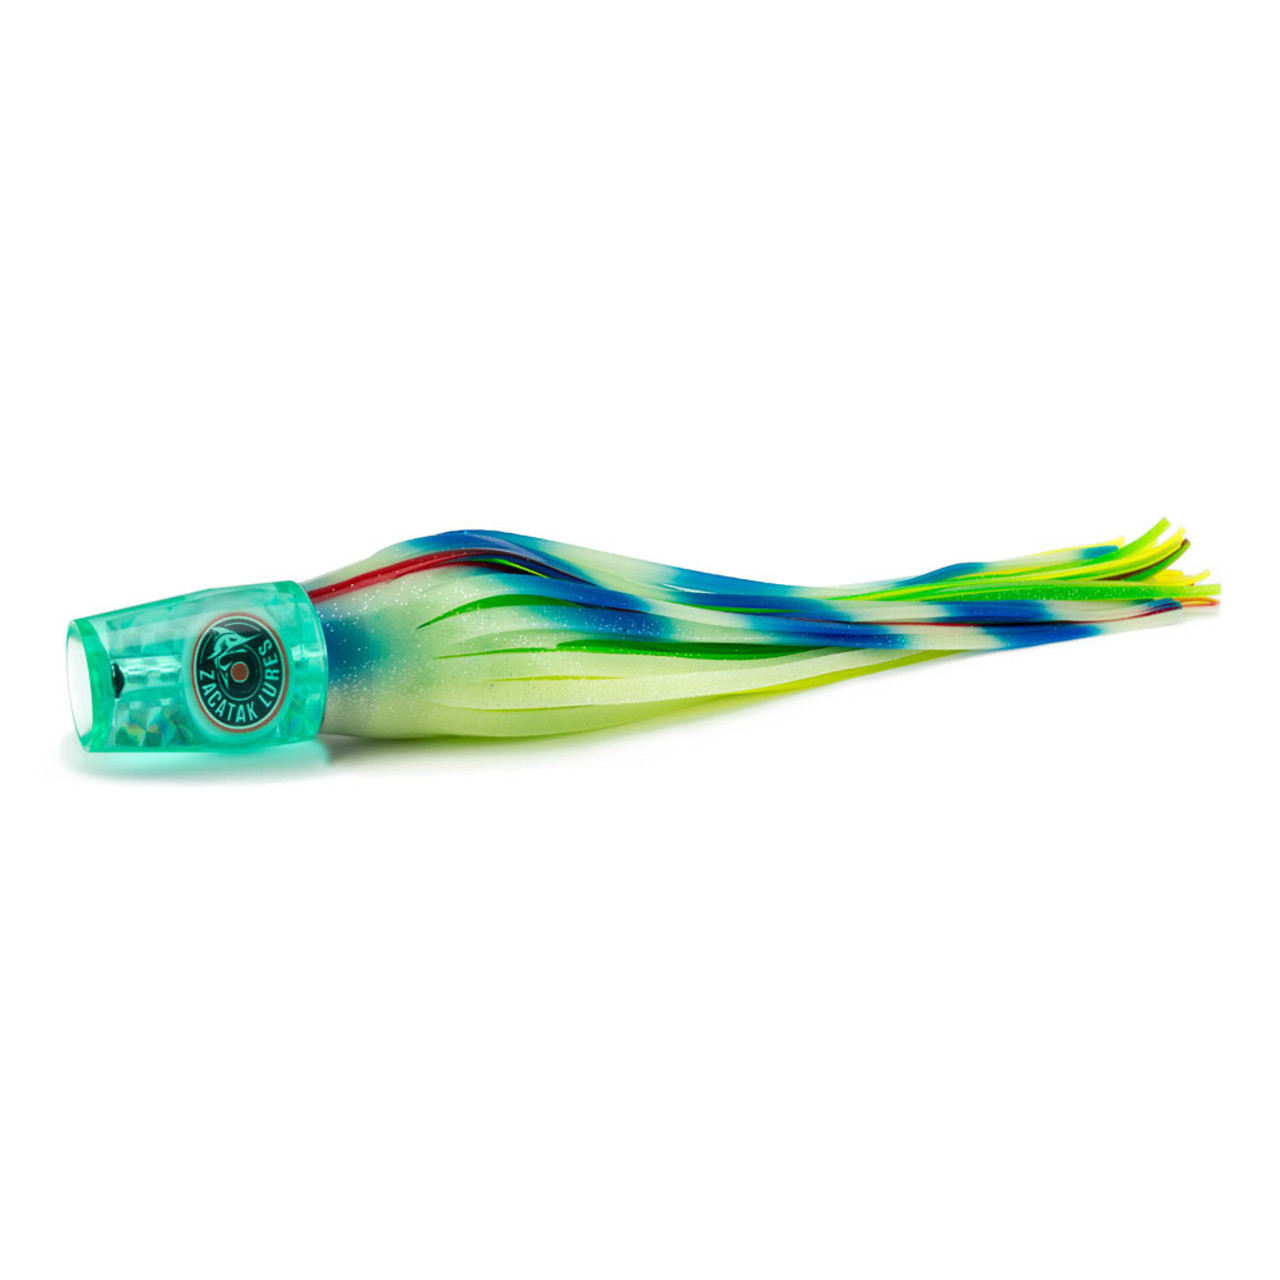 Shop Marlin Lures  Loads of action for the ultimate marlin bite!